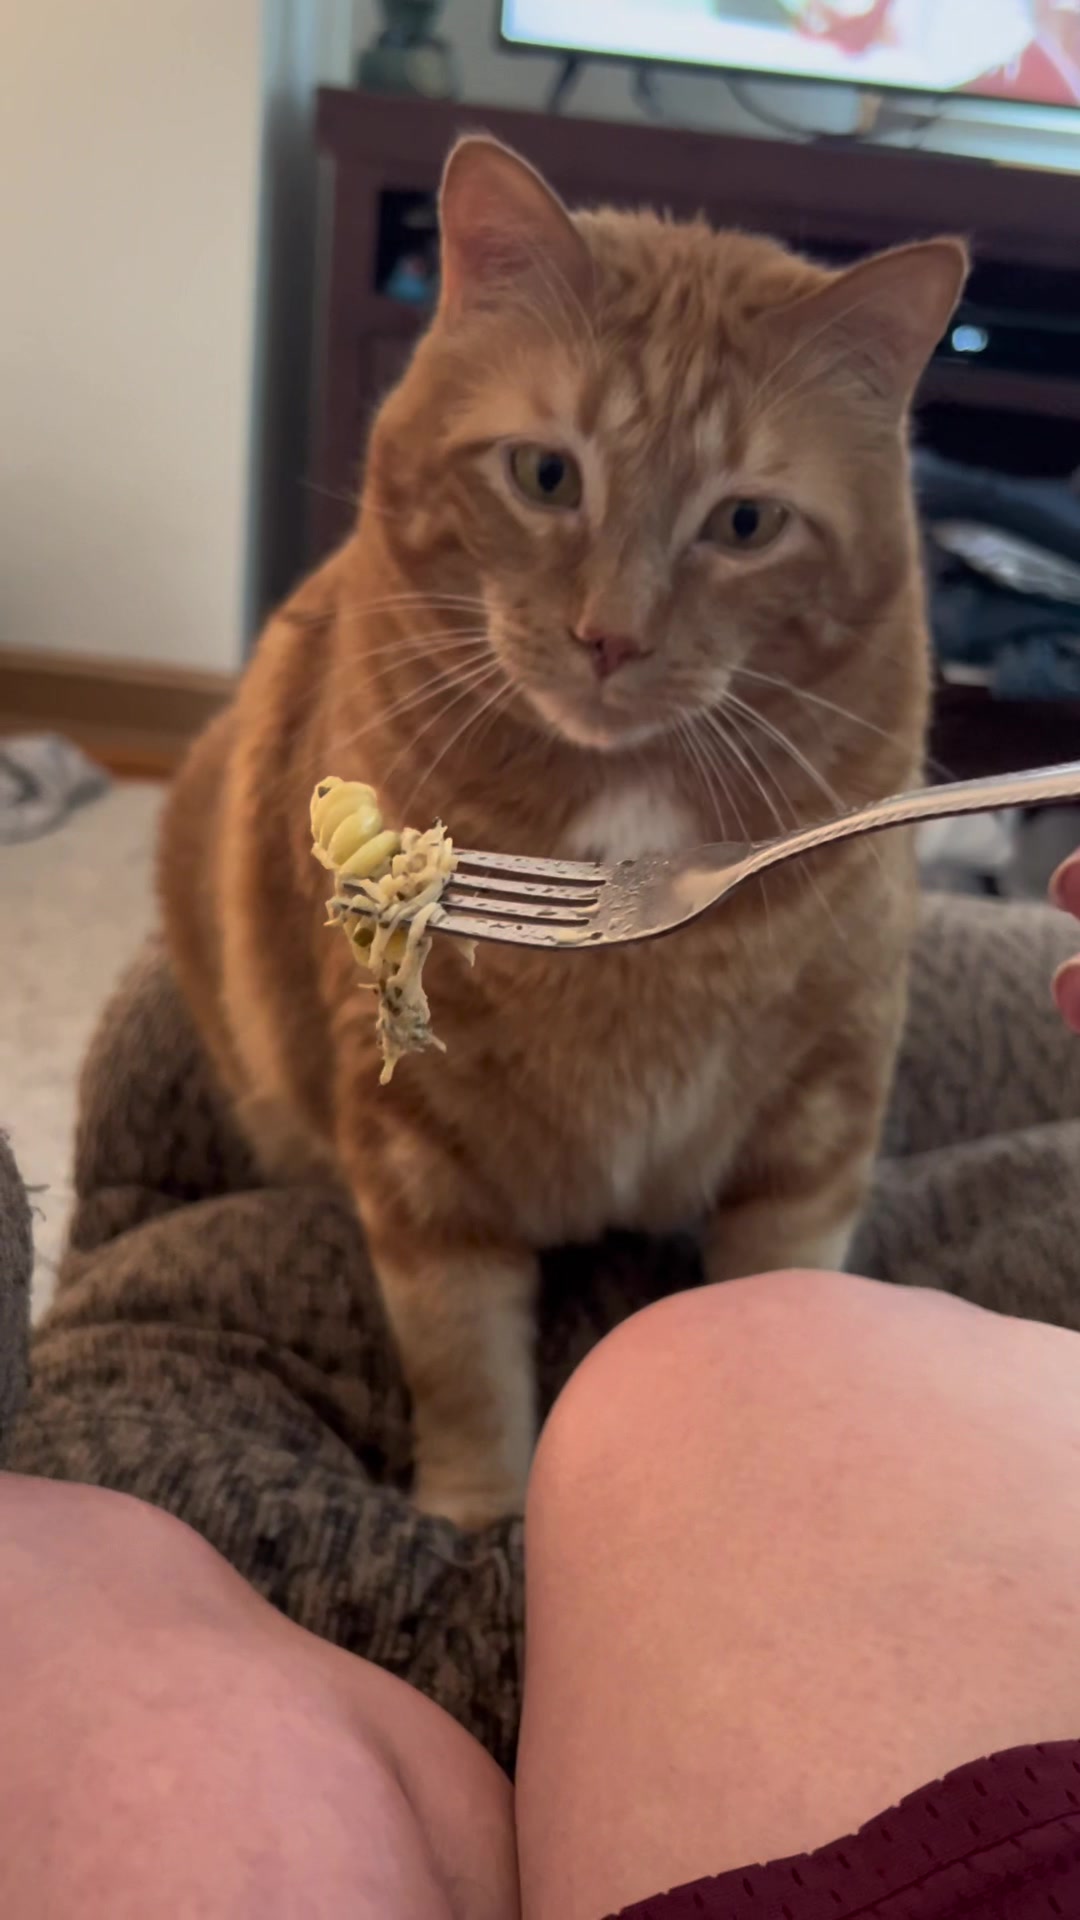 He stole some off my plate afterwards. 🤦🏻‍♀️ #catvideos #catsoftiktok #dinnertime #fyp #foryoupage #funnycatvideo #funnycatvideo #funnycat #pestochickenpasta  | Text TIKTOK to 833-880-7724 For A Free Evening Promo Code